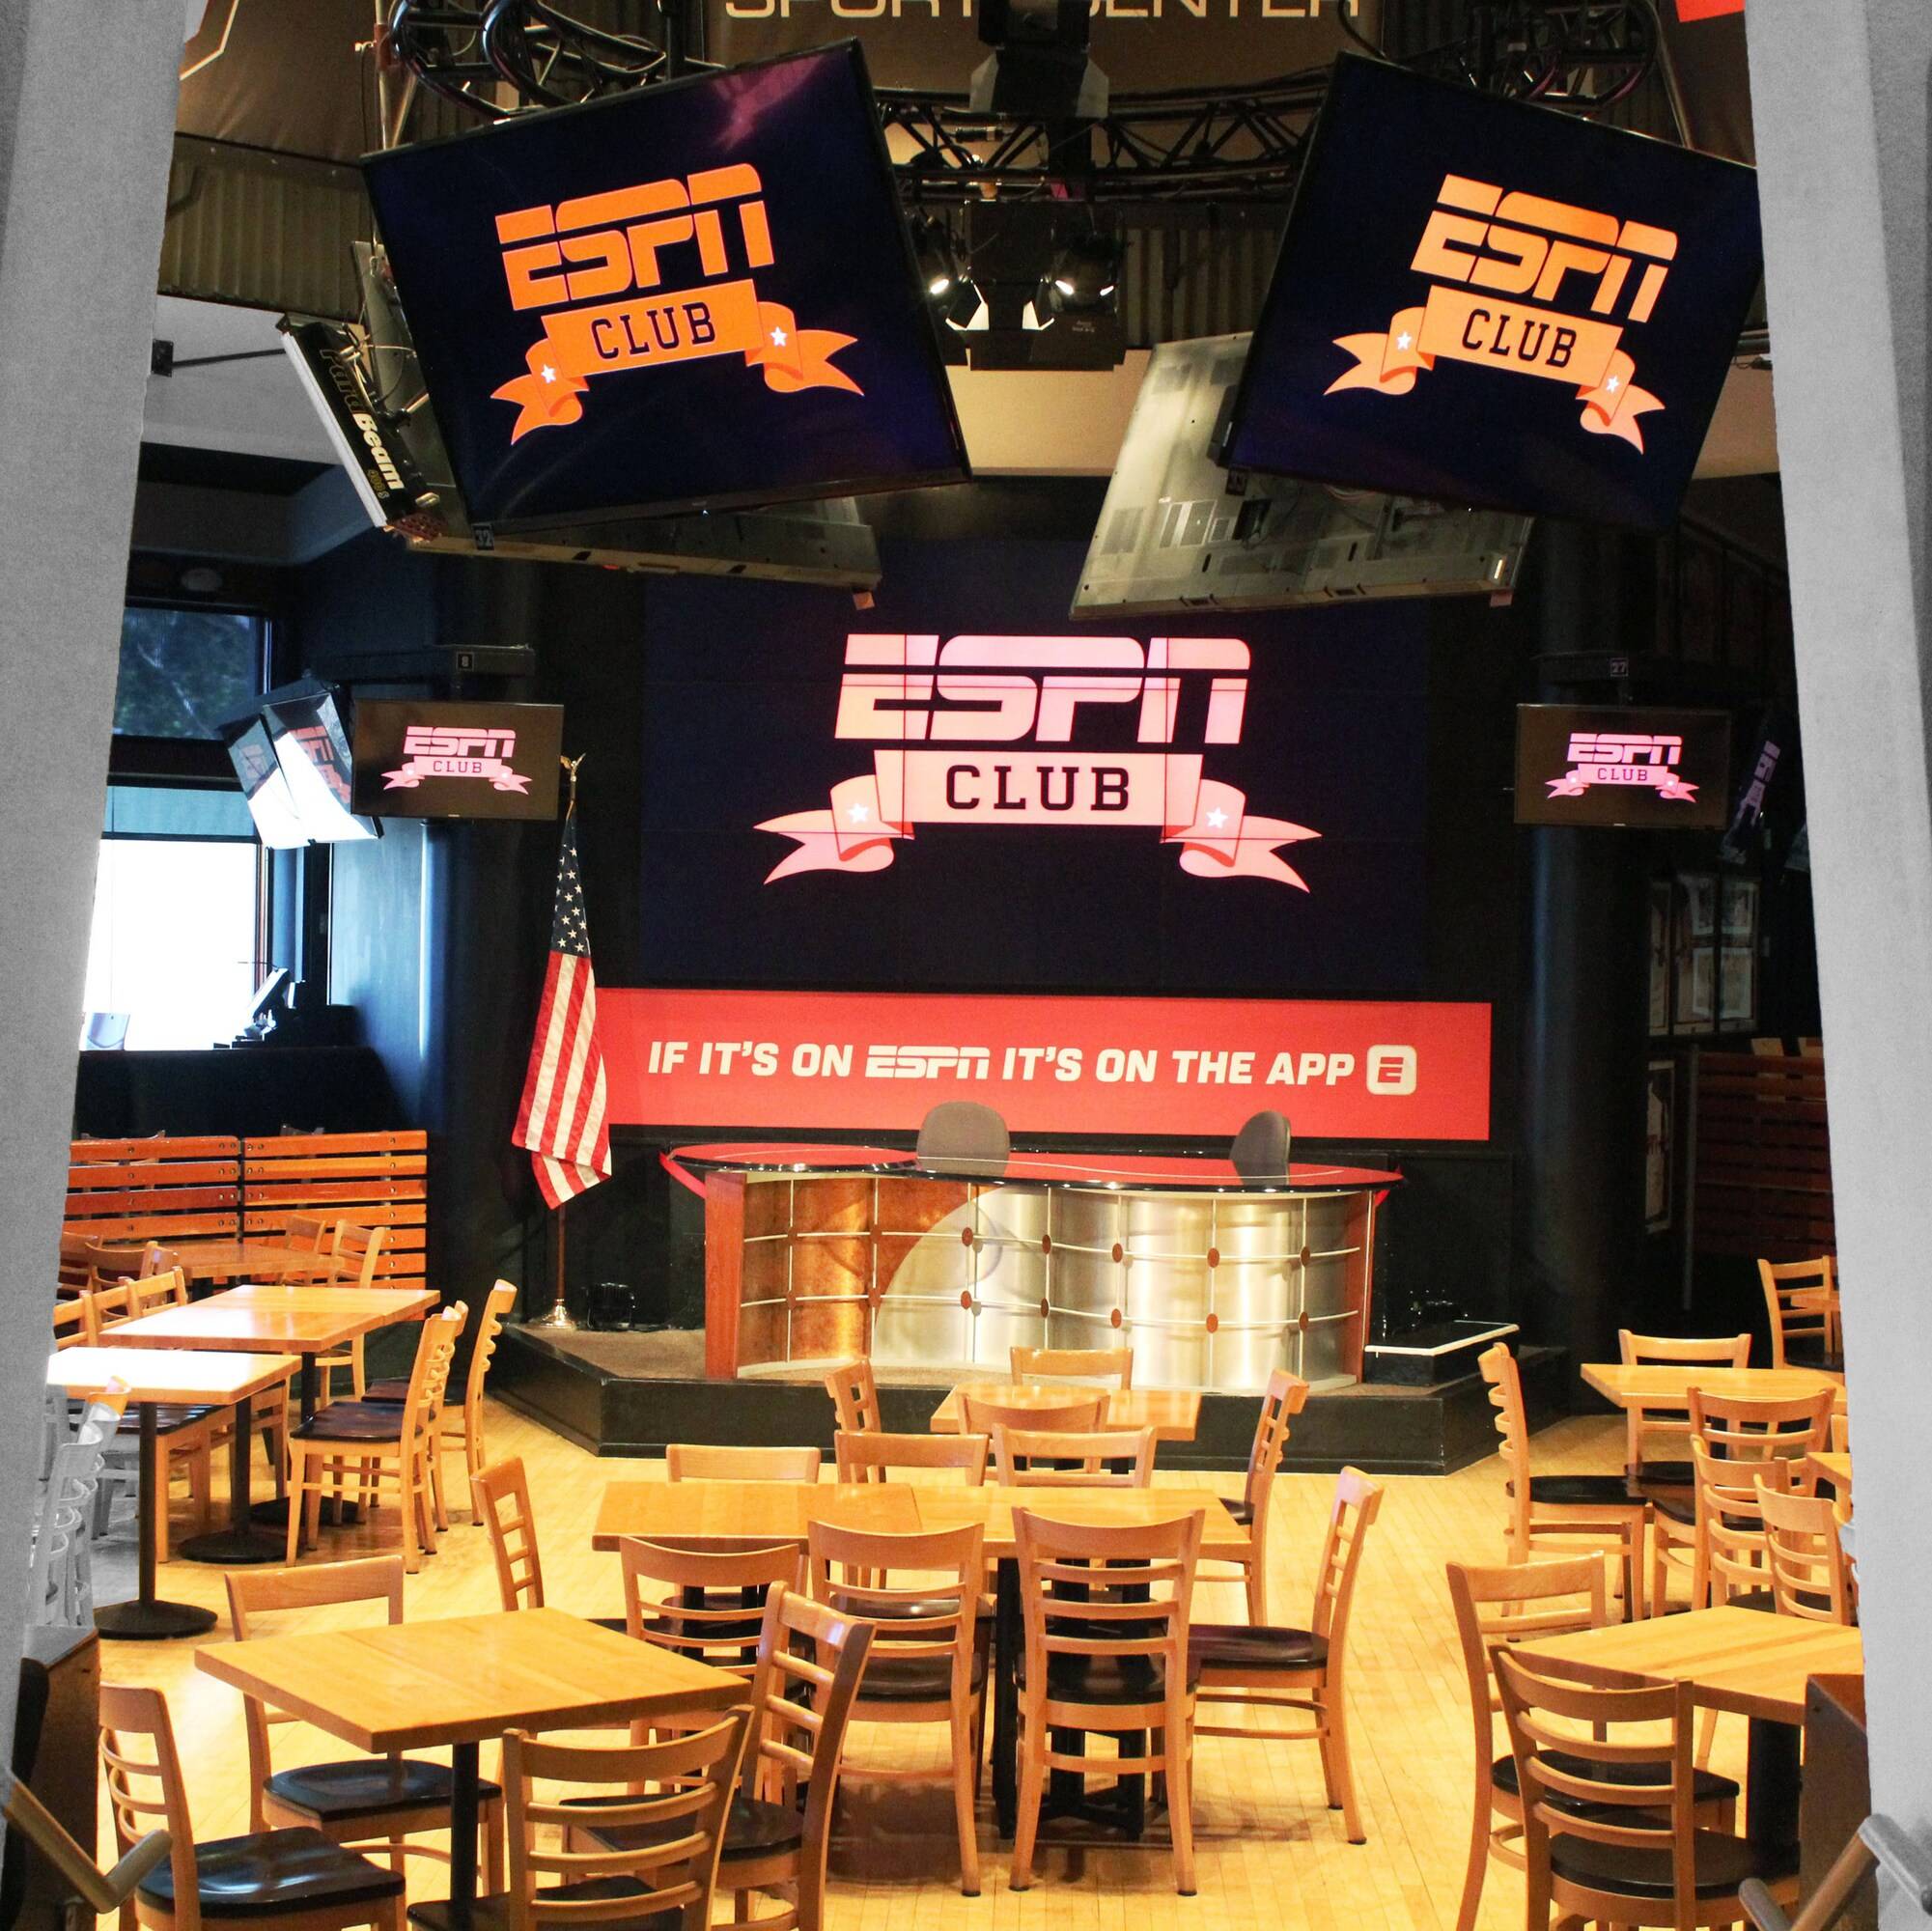 ESPN Club permanently closes at Walt Disney World's BoardWalk to be replaced with The Cake Bake Shop by Gwendolyn Rogers